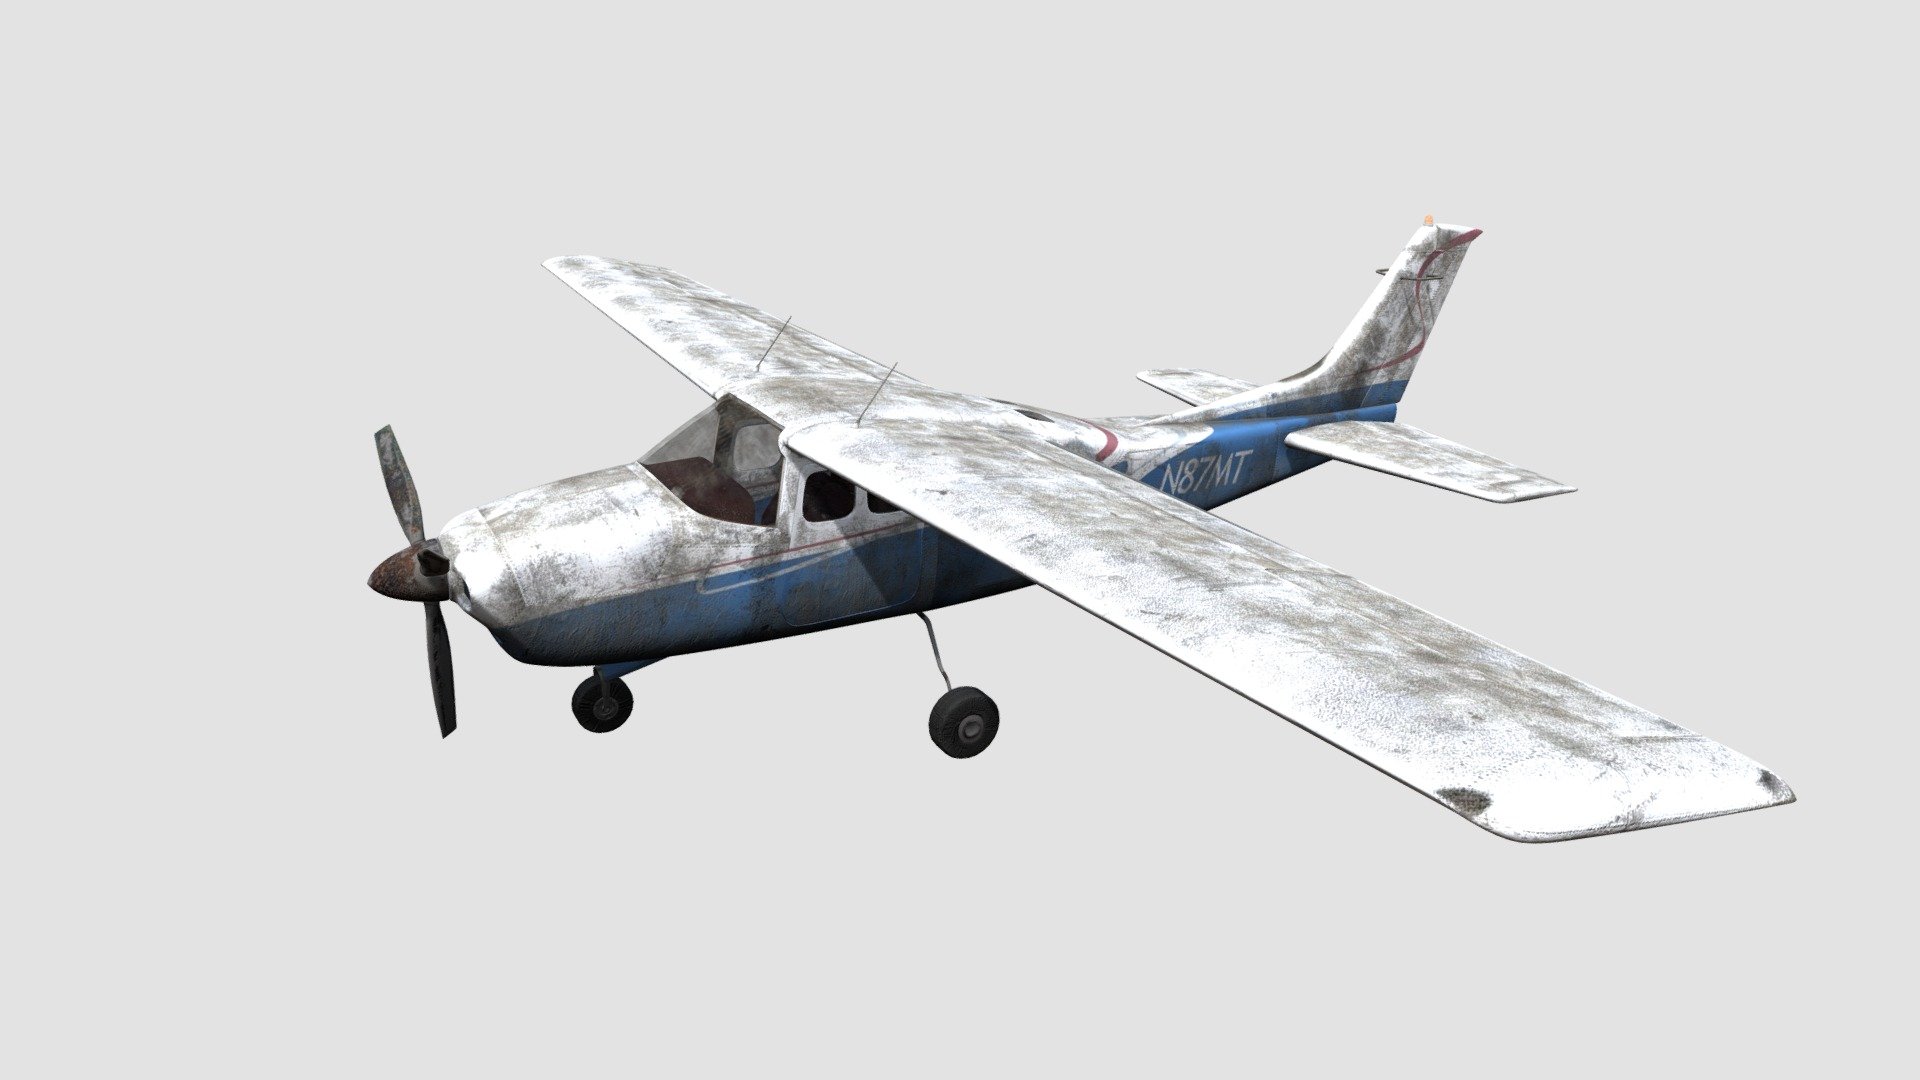 Highly detailed 3d model of destroyed plane with all textures, shaders and materials. It is ready to use, just put it into your scene 3d model